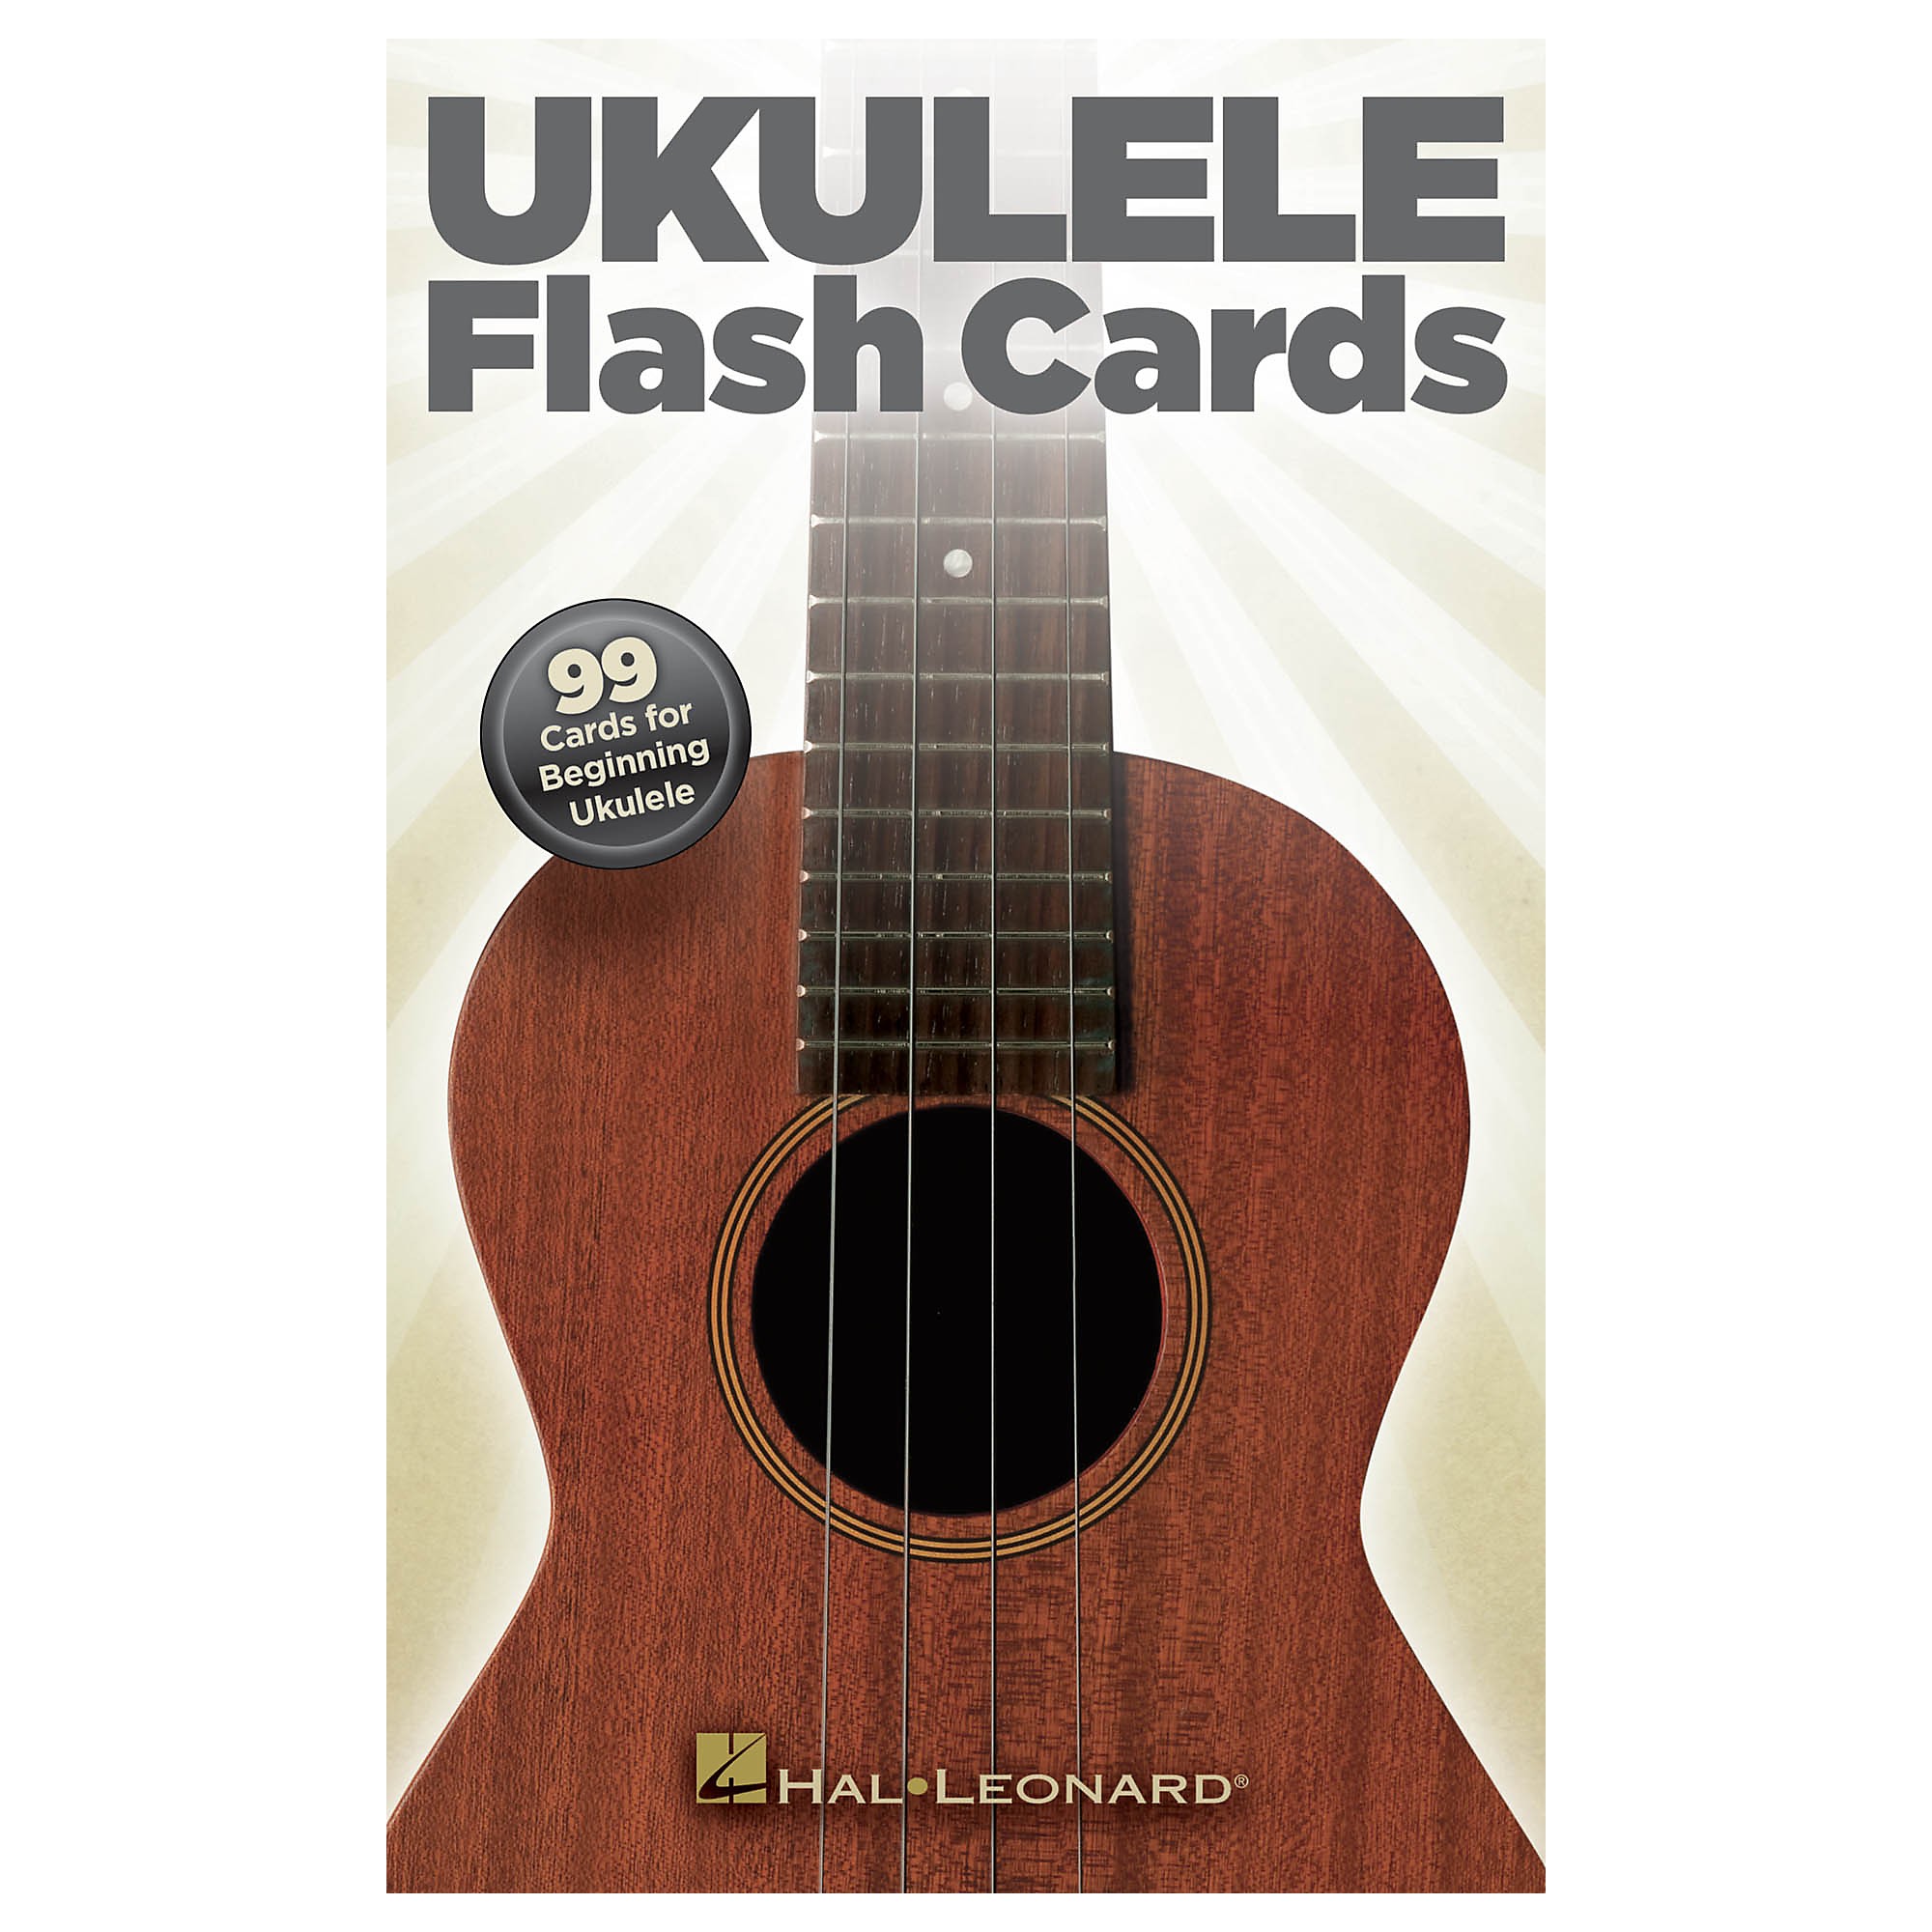 Guitar note flash cards